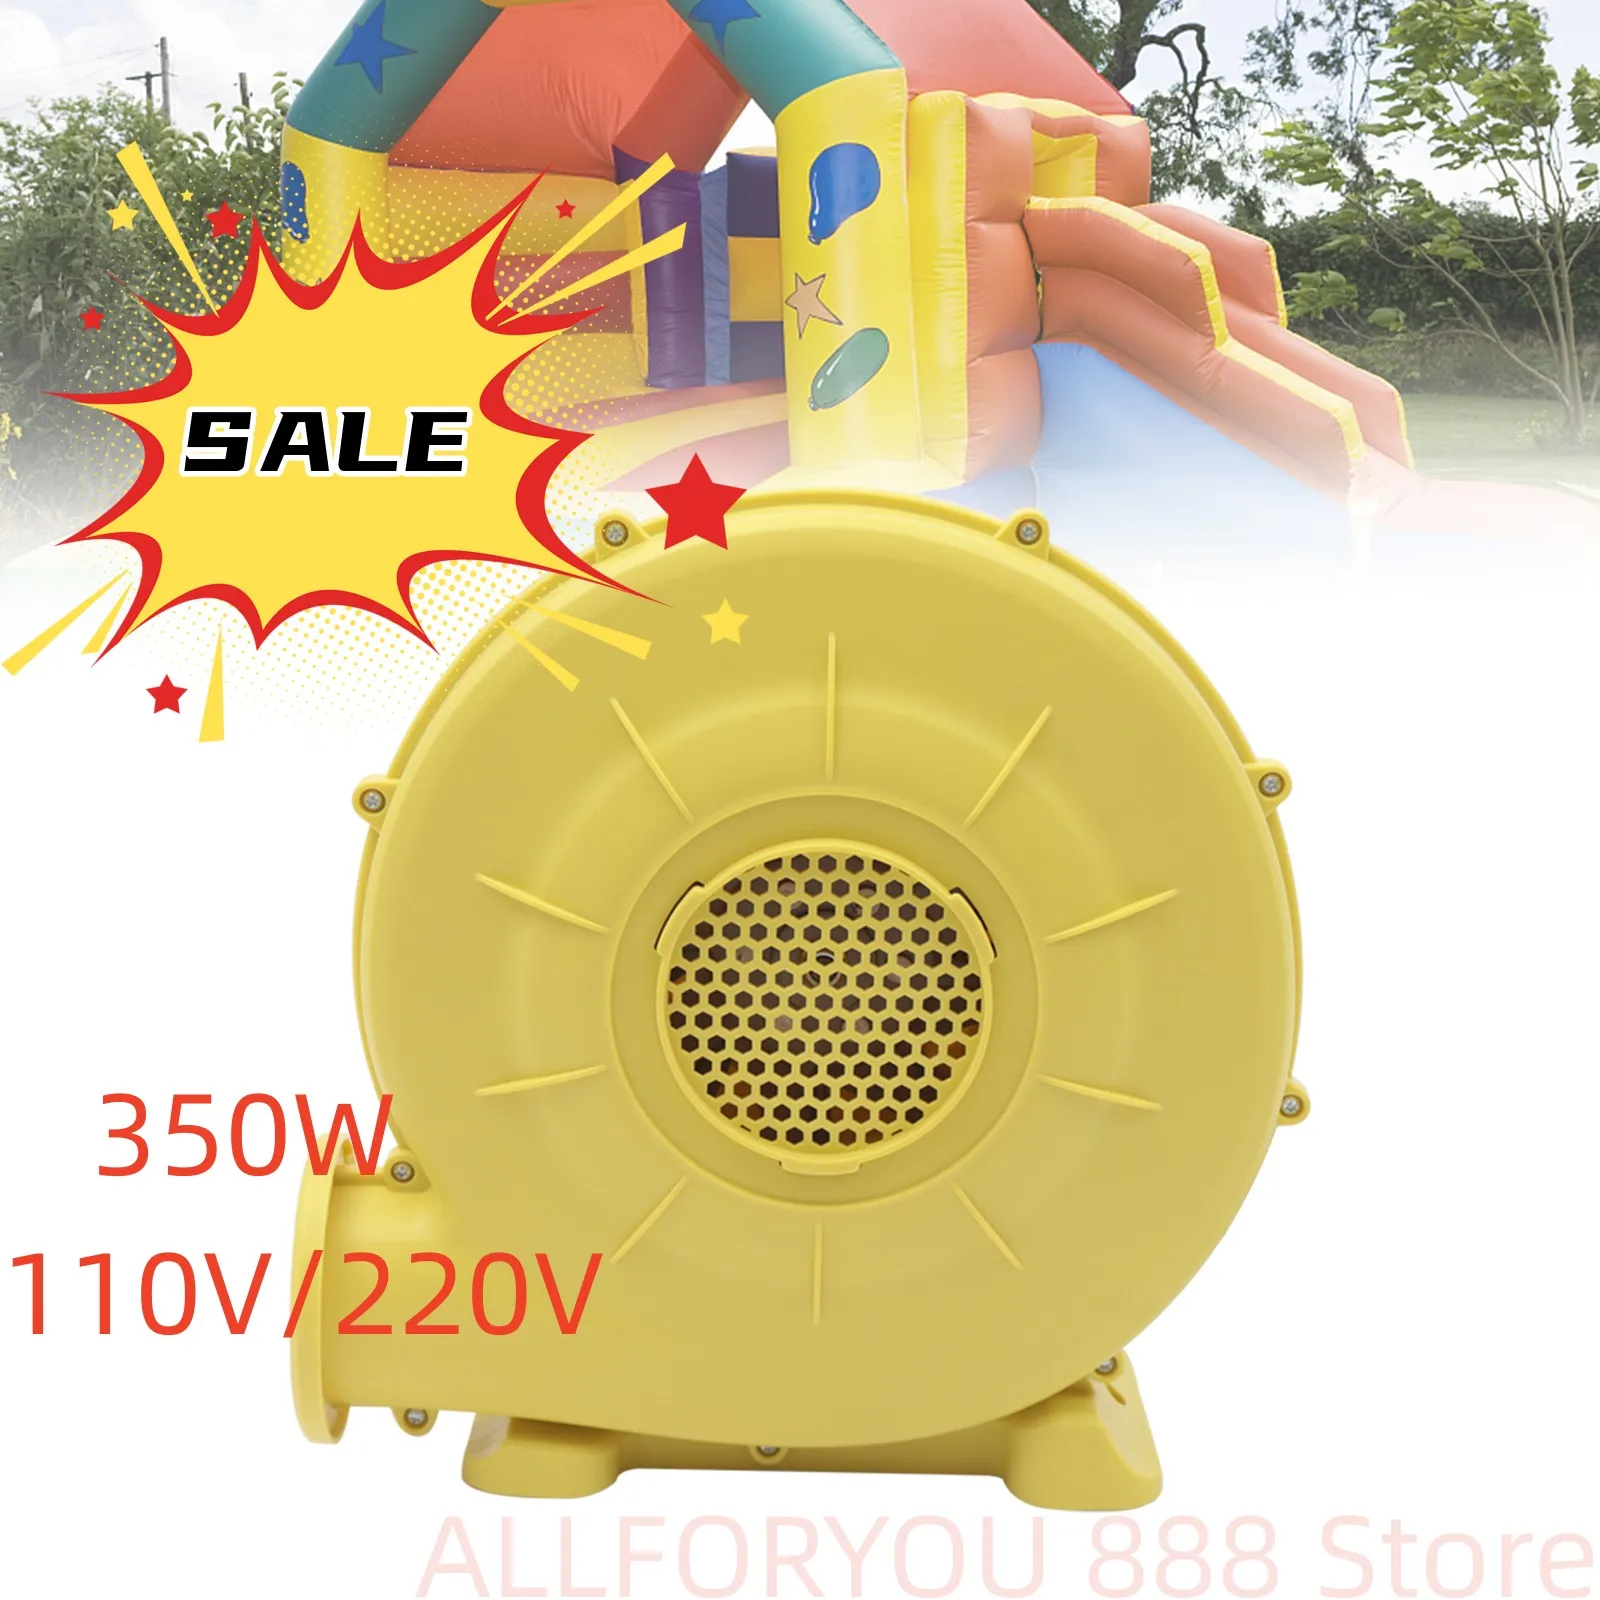 350W Air Blower Suitable For Outdoor Bounce Houses, Water slides, Obstacle Courses 110V/220V